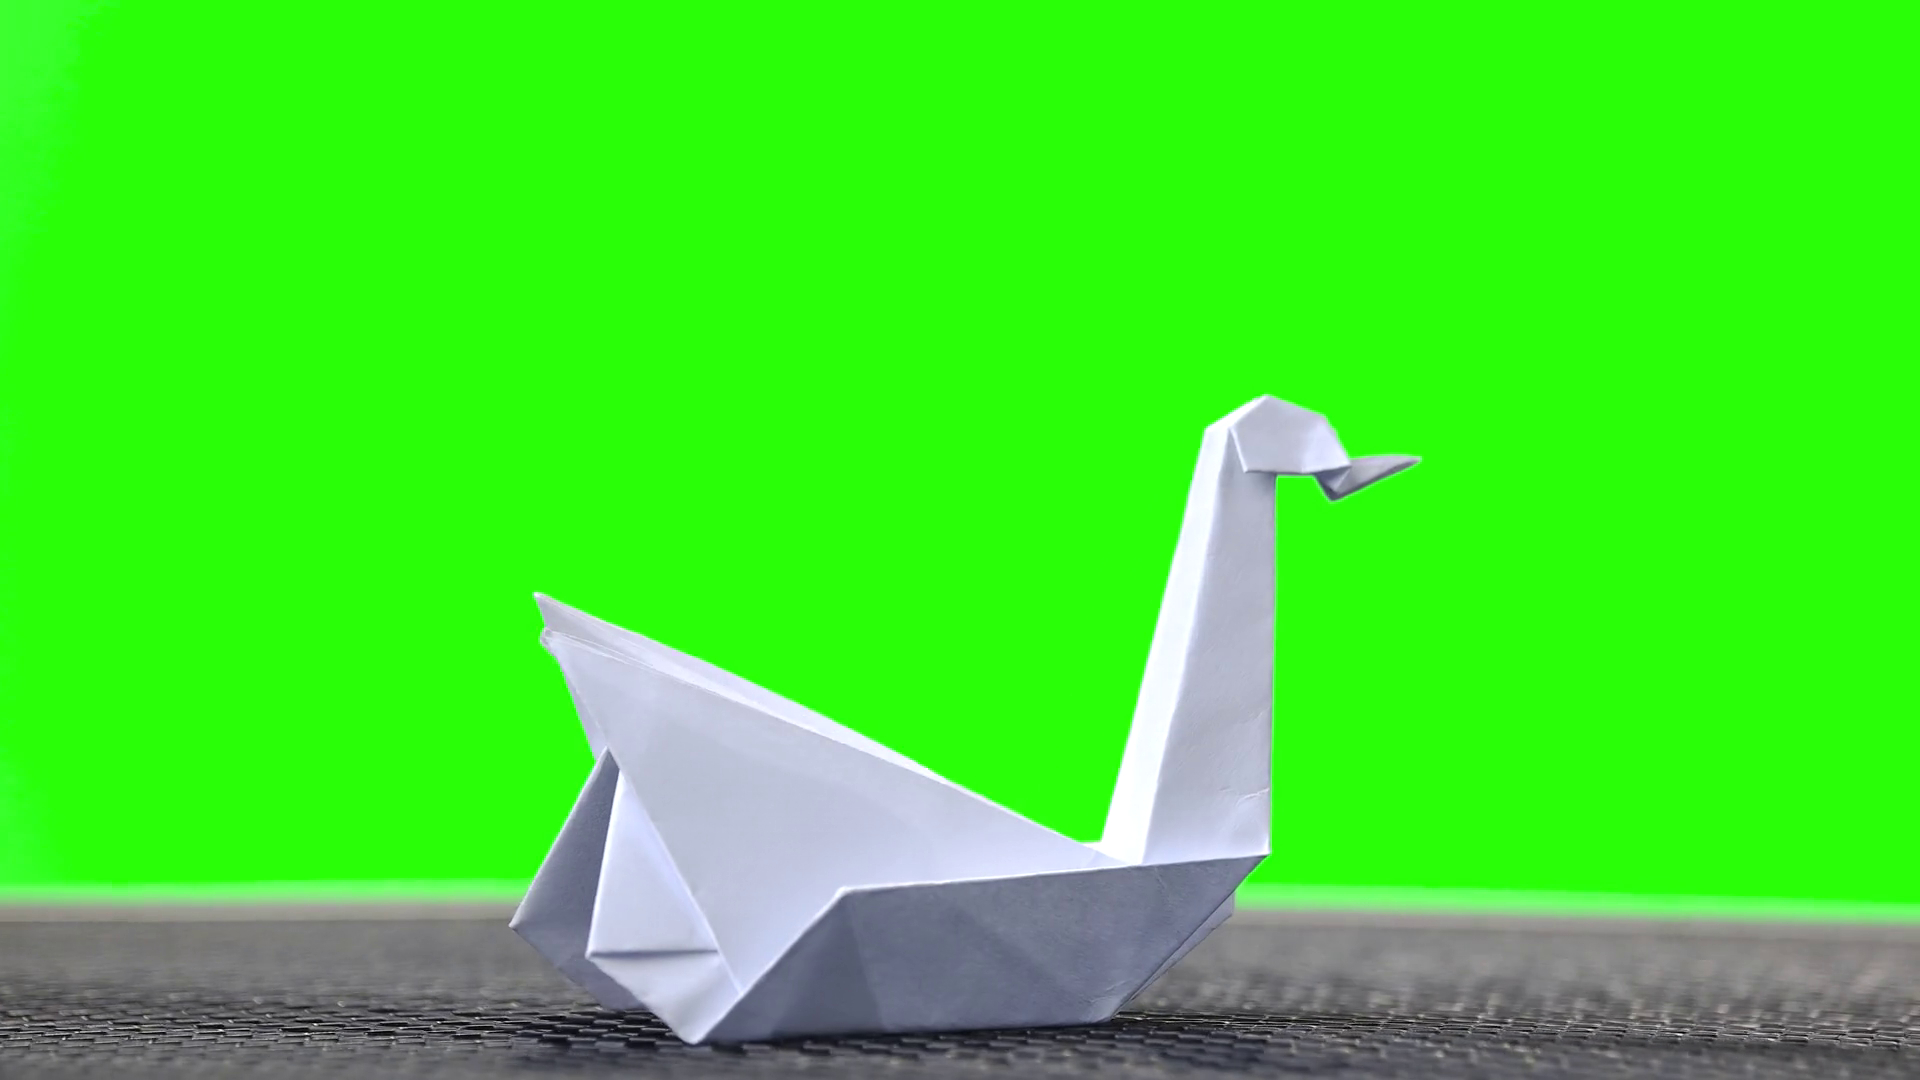 How To Make Origami Swans White Origami Swan On Green Screen Folded Paper Bird On Chroma Key Background Decorative Paper Element